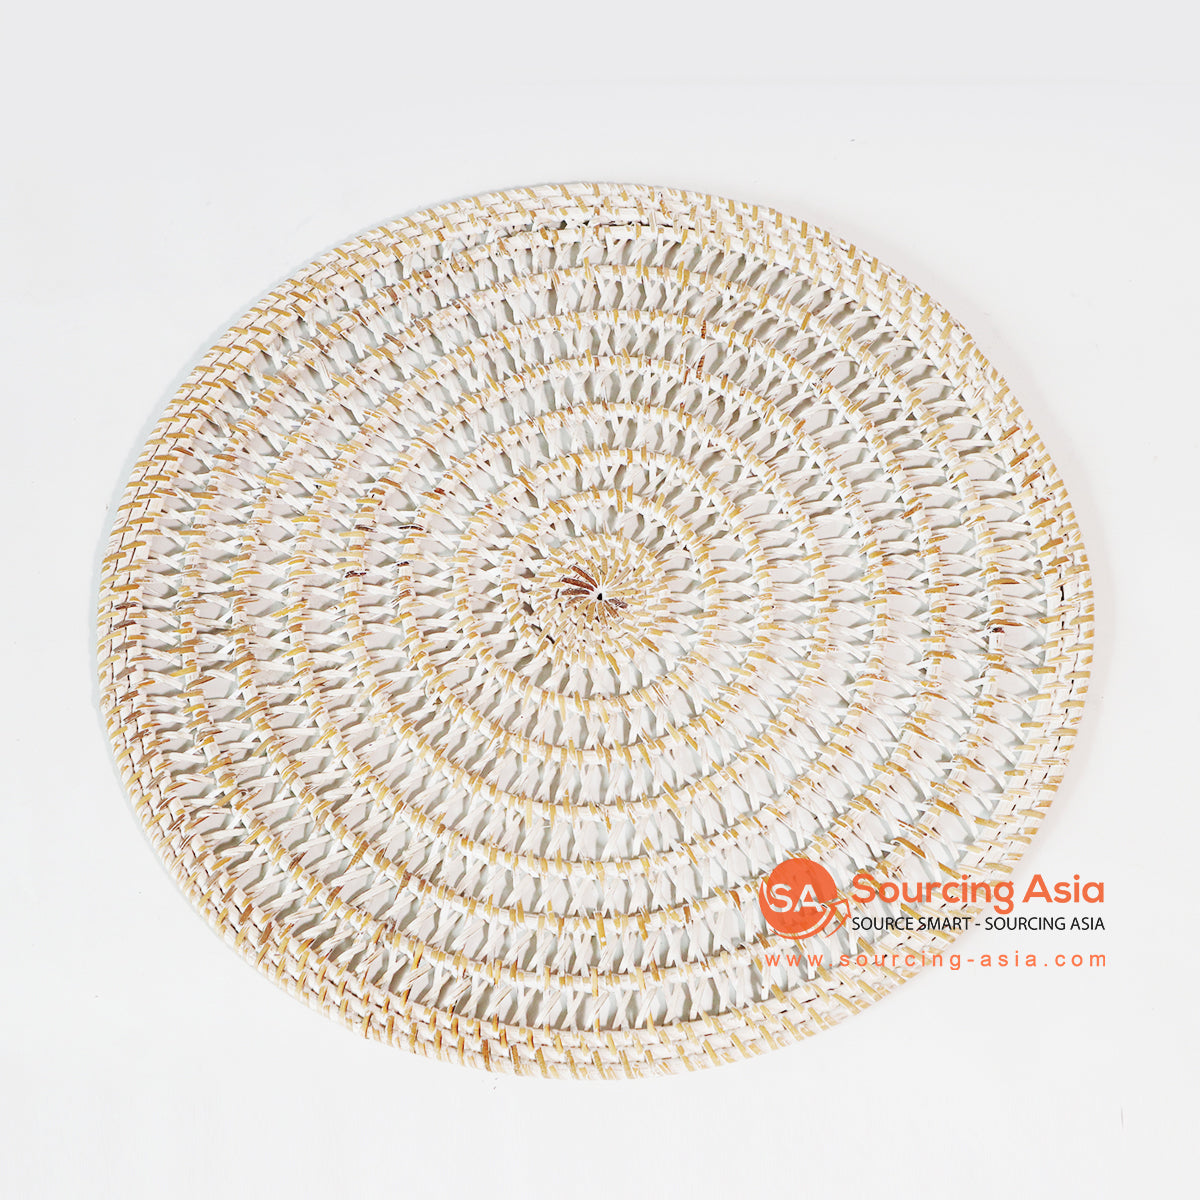 MTIC036 WHITE WOVEN RATTAN PLACEMAT